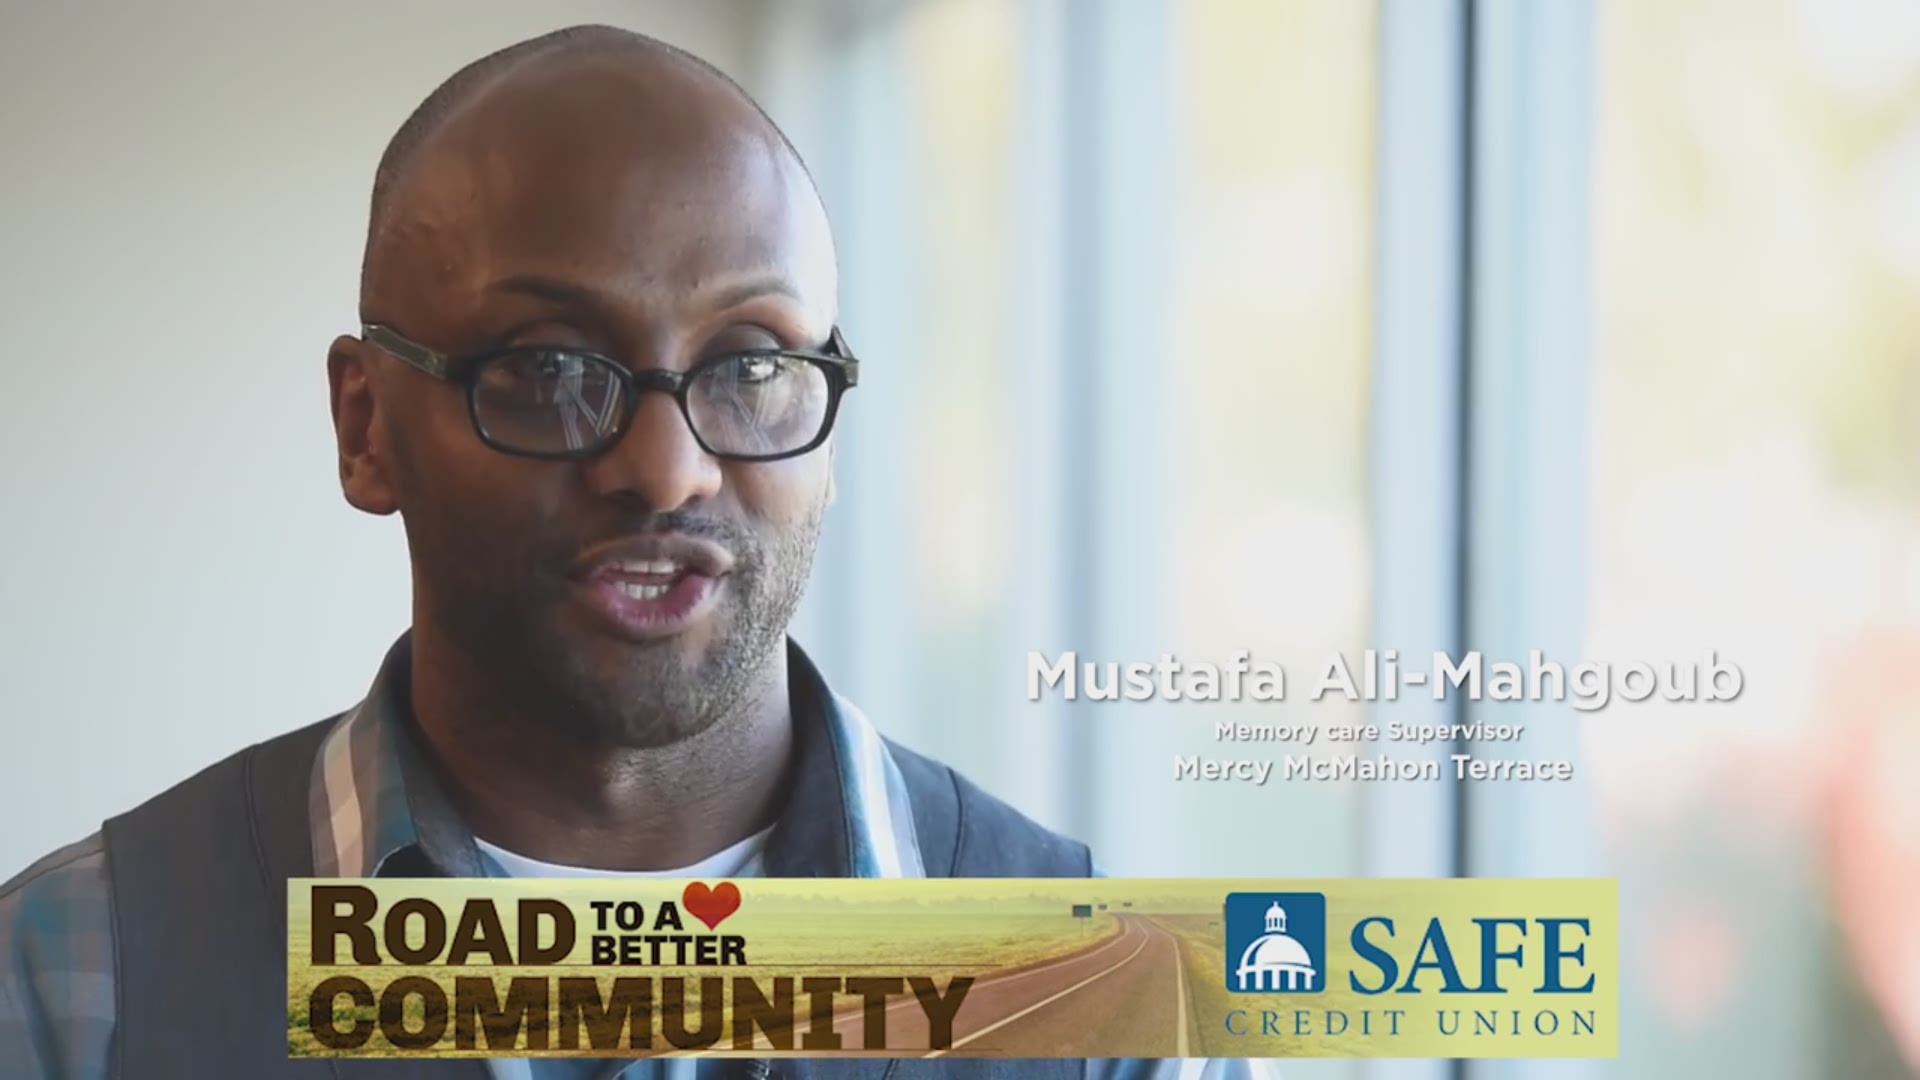 Road to a Better Community is brought to you by SAFE Credit Union.